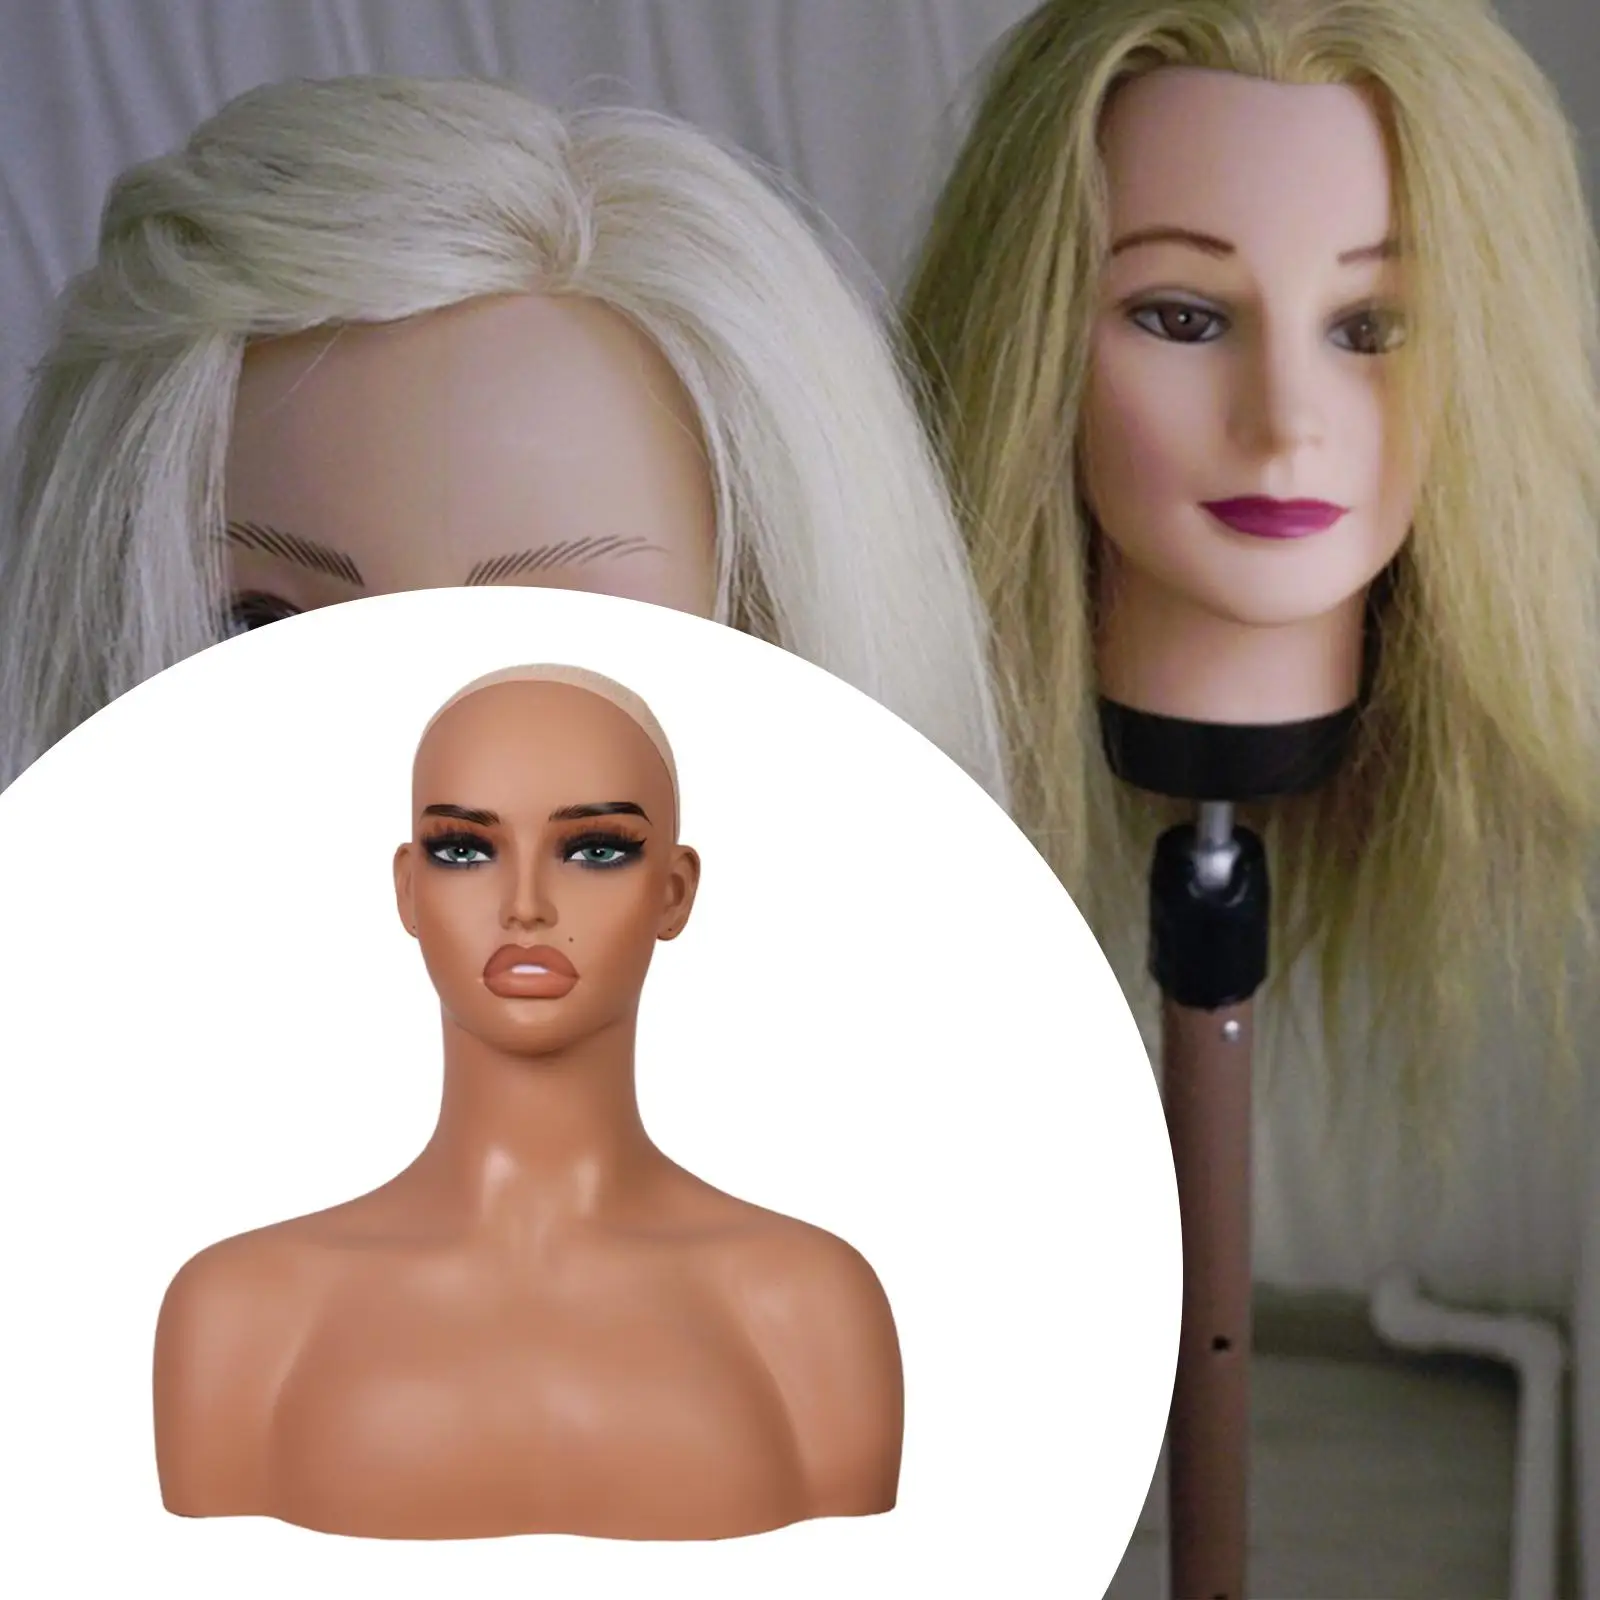 Mannequin Head PVC Wig Display Stand for Wig Necklace Earrings Displayiny